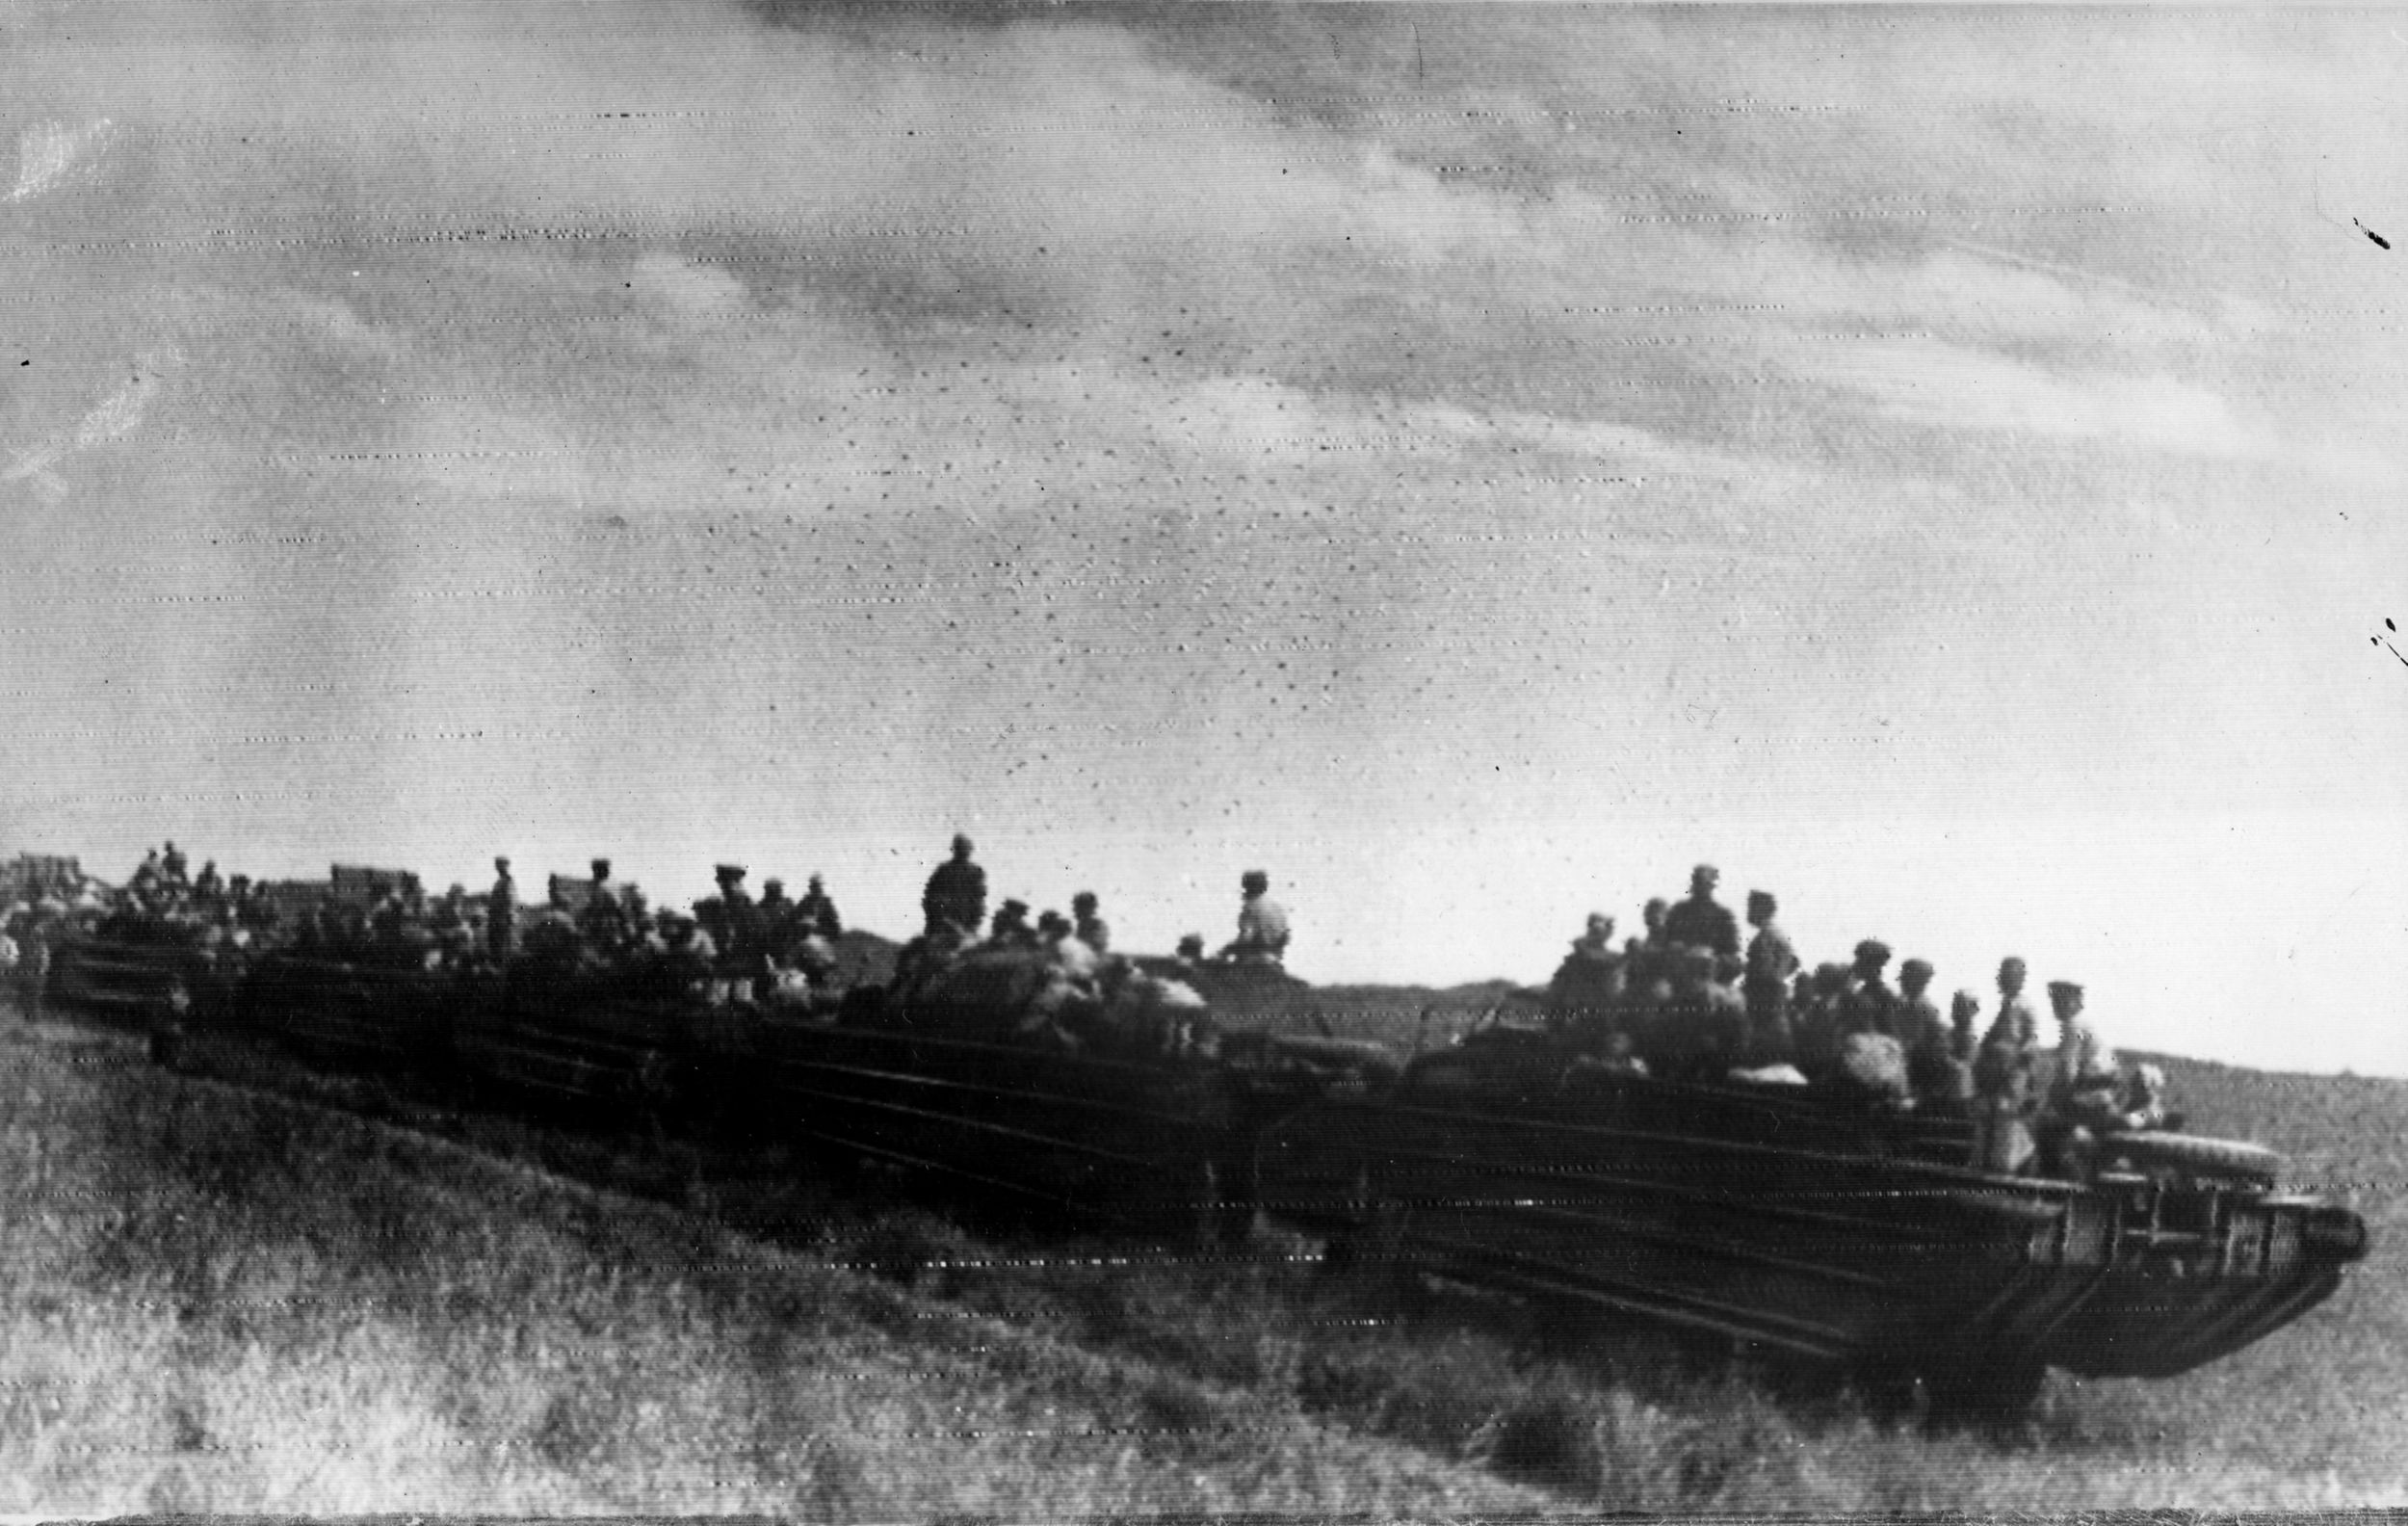 A Soviet motorized column moves up to forward positions in the steppes of Manchuria on the morning of August 9, 1945, in one of the last military operations of World War II.